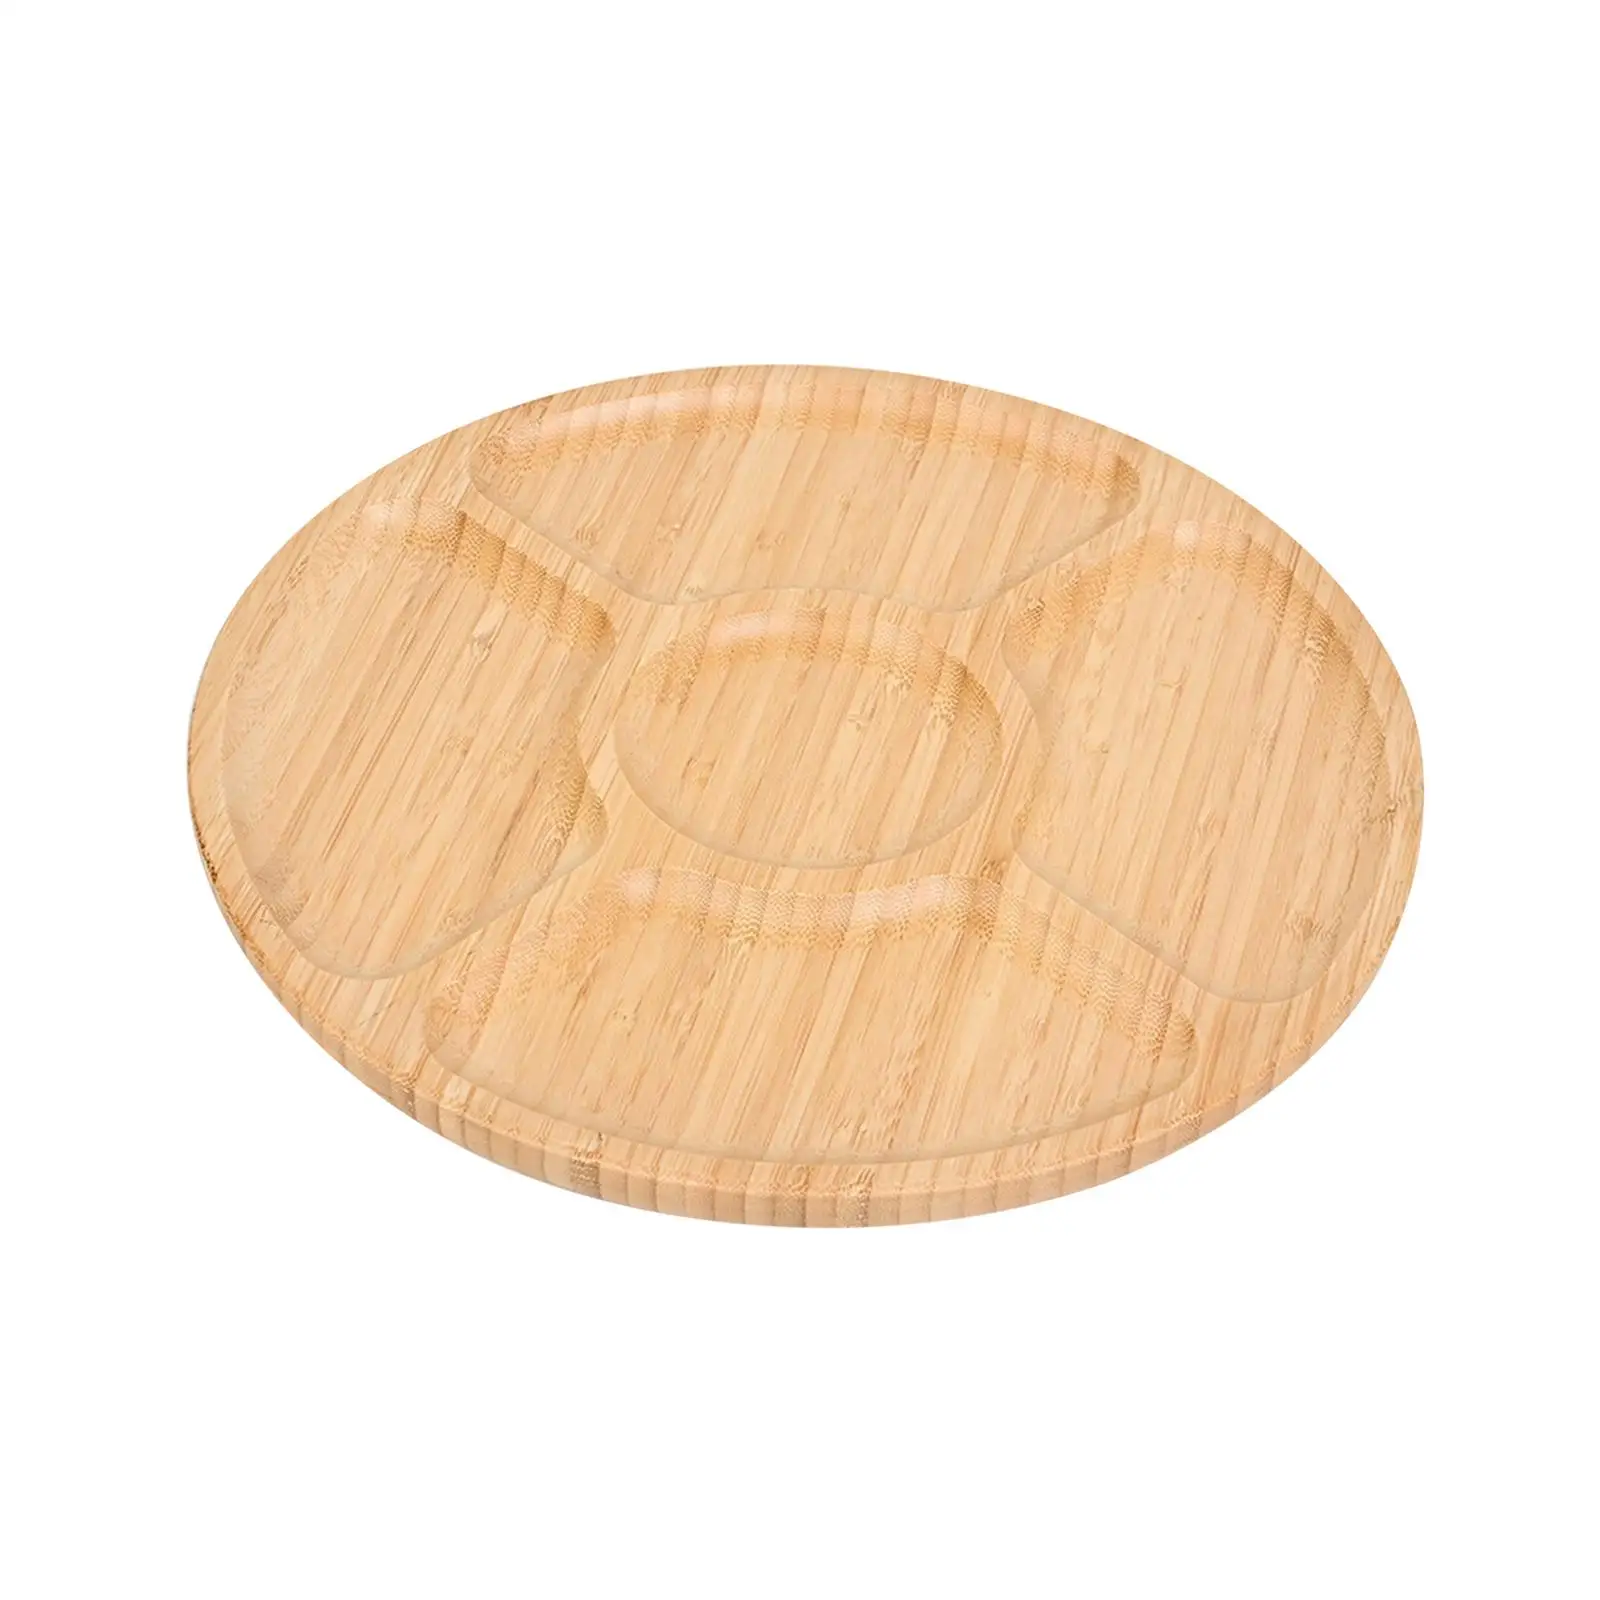 Wooden Tray Decor Family Dinner Serving Dishes Snacks Plate 5 Section Fruit Plate for Cheese Dinner Appetizer Vegetable Candies